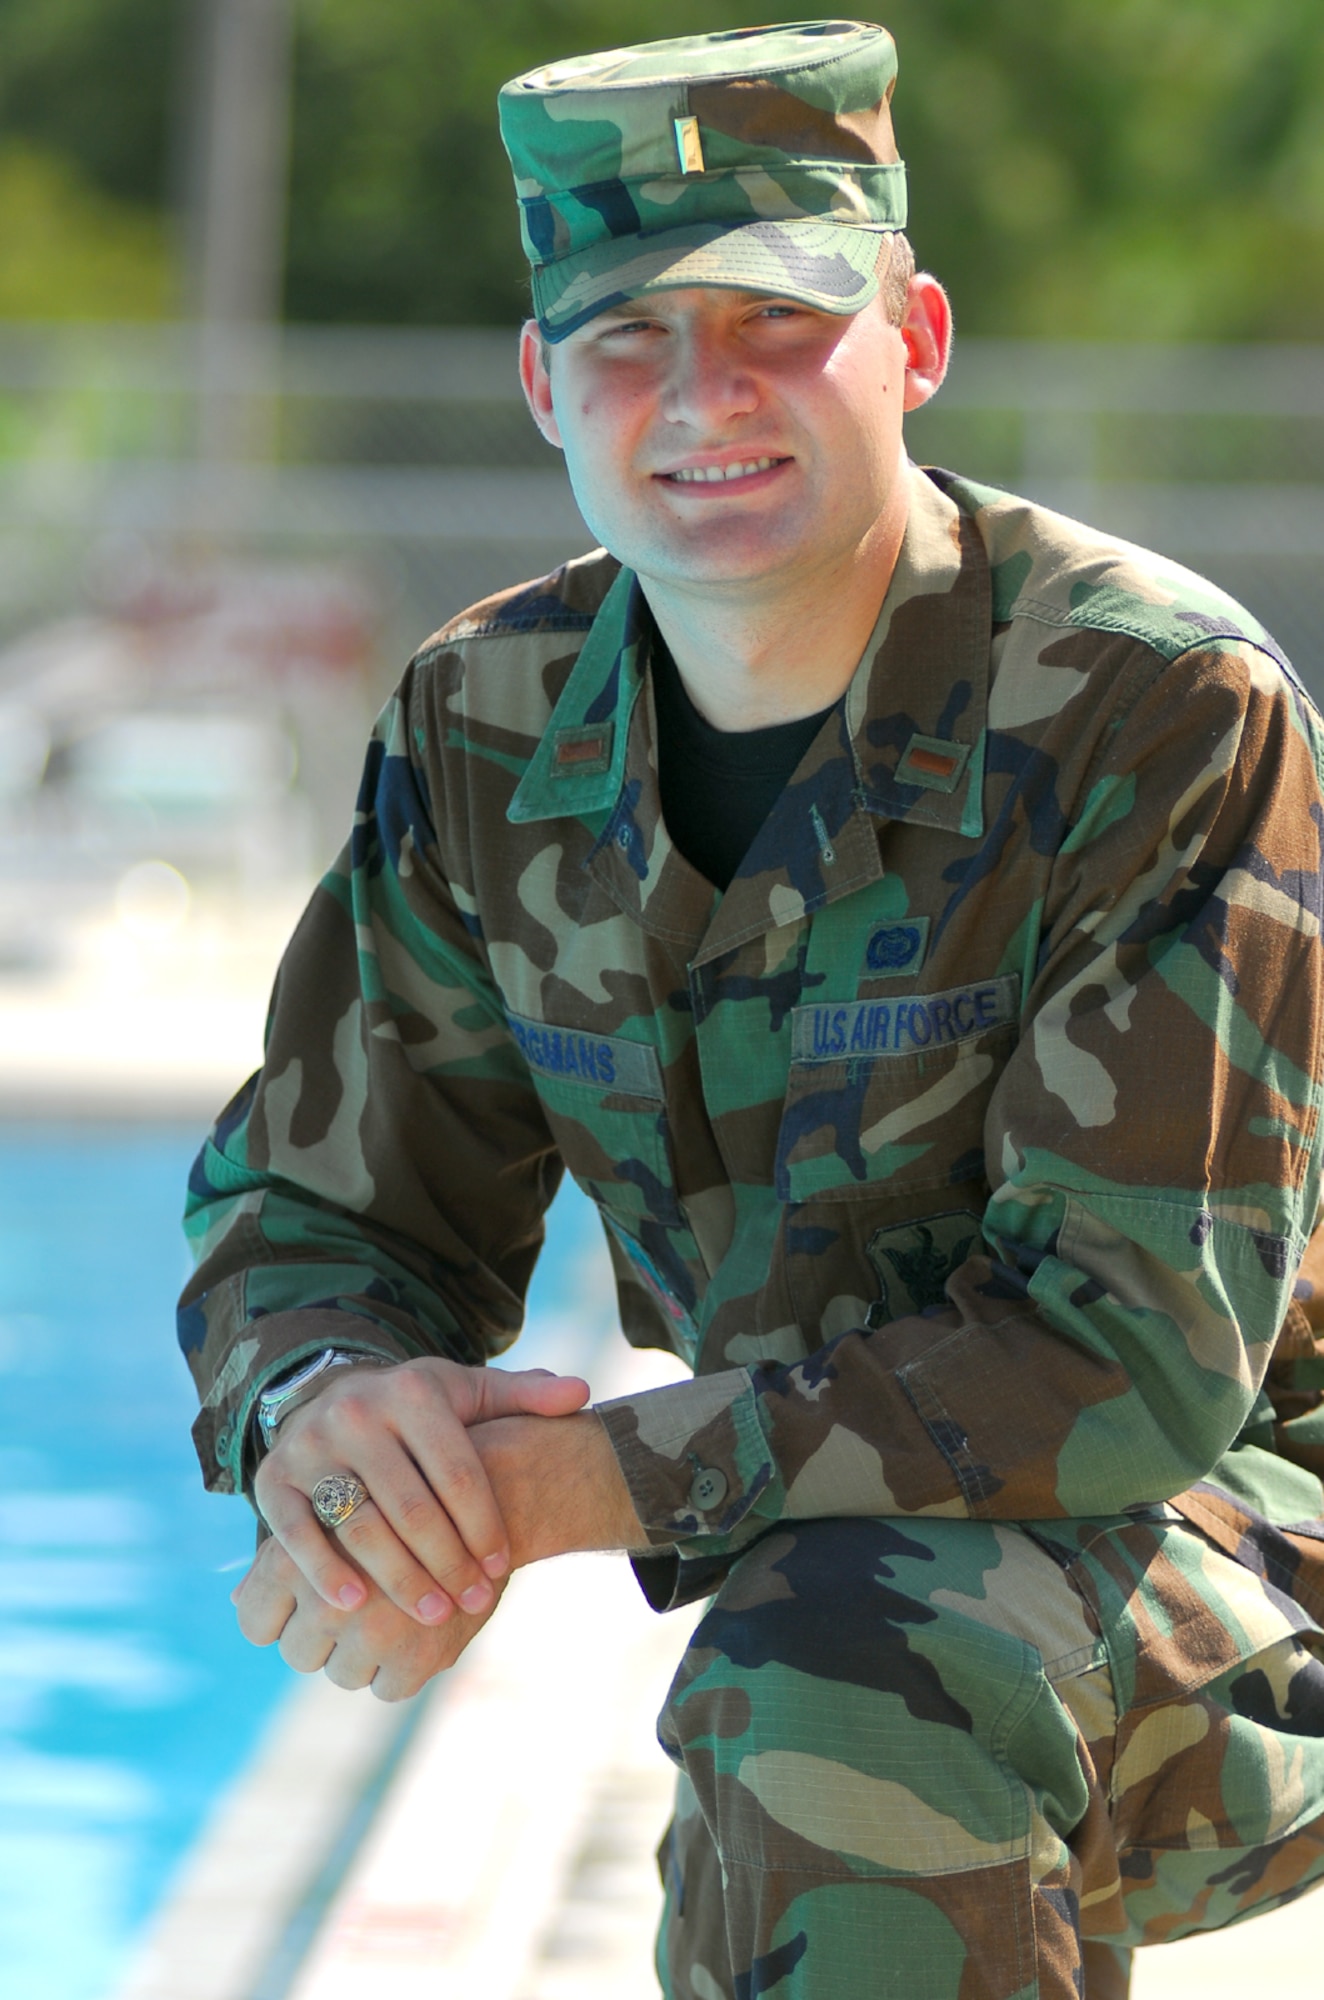 2nd Lt. John Bergmans, 820th Security Forces Group intelligence analyst, recently helped revive a small child who appeared to have drowned at his apartment complex's pool. Lieutenant Bergmans' combined Air Force self-aid and buddy care training with instinctive thinking to remove the water from the child's lungs, helped her begin breathing. (U.S. Air Force photo by Tech. Sgt. Parker Gyokeres)